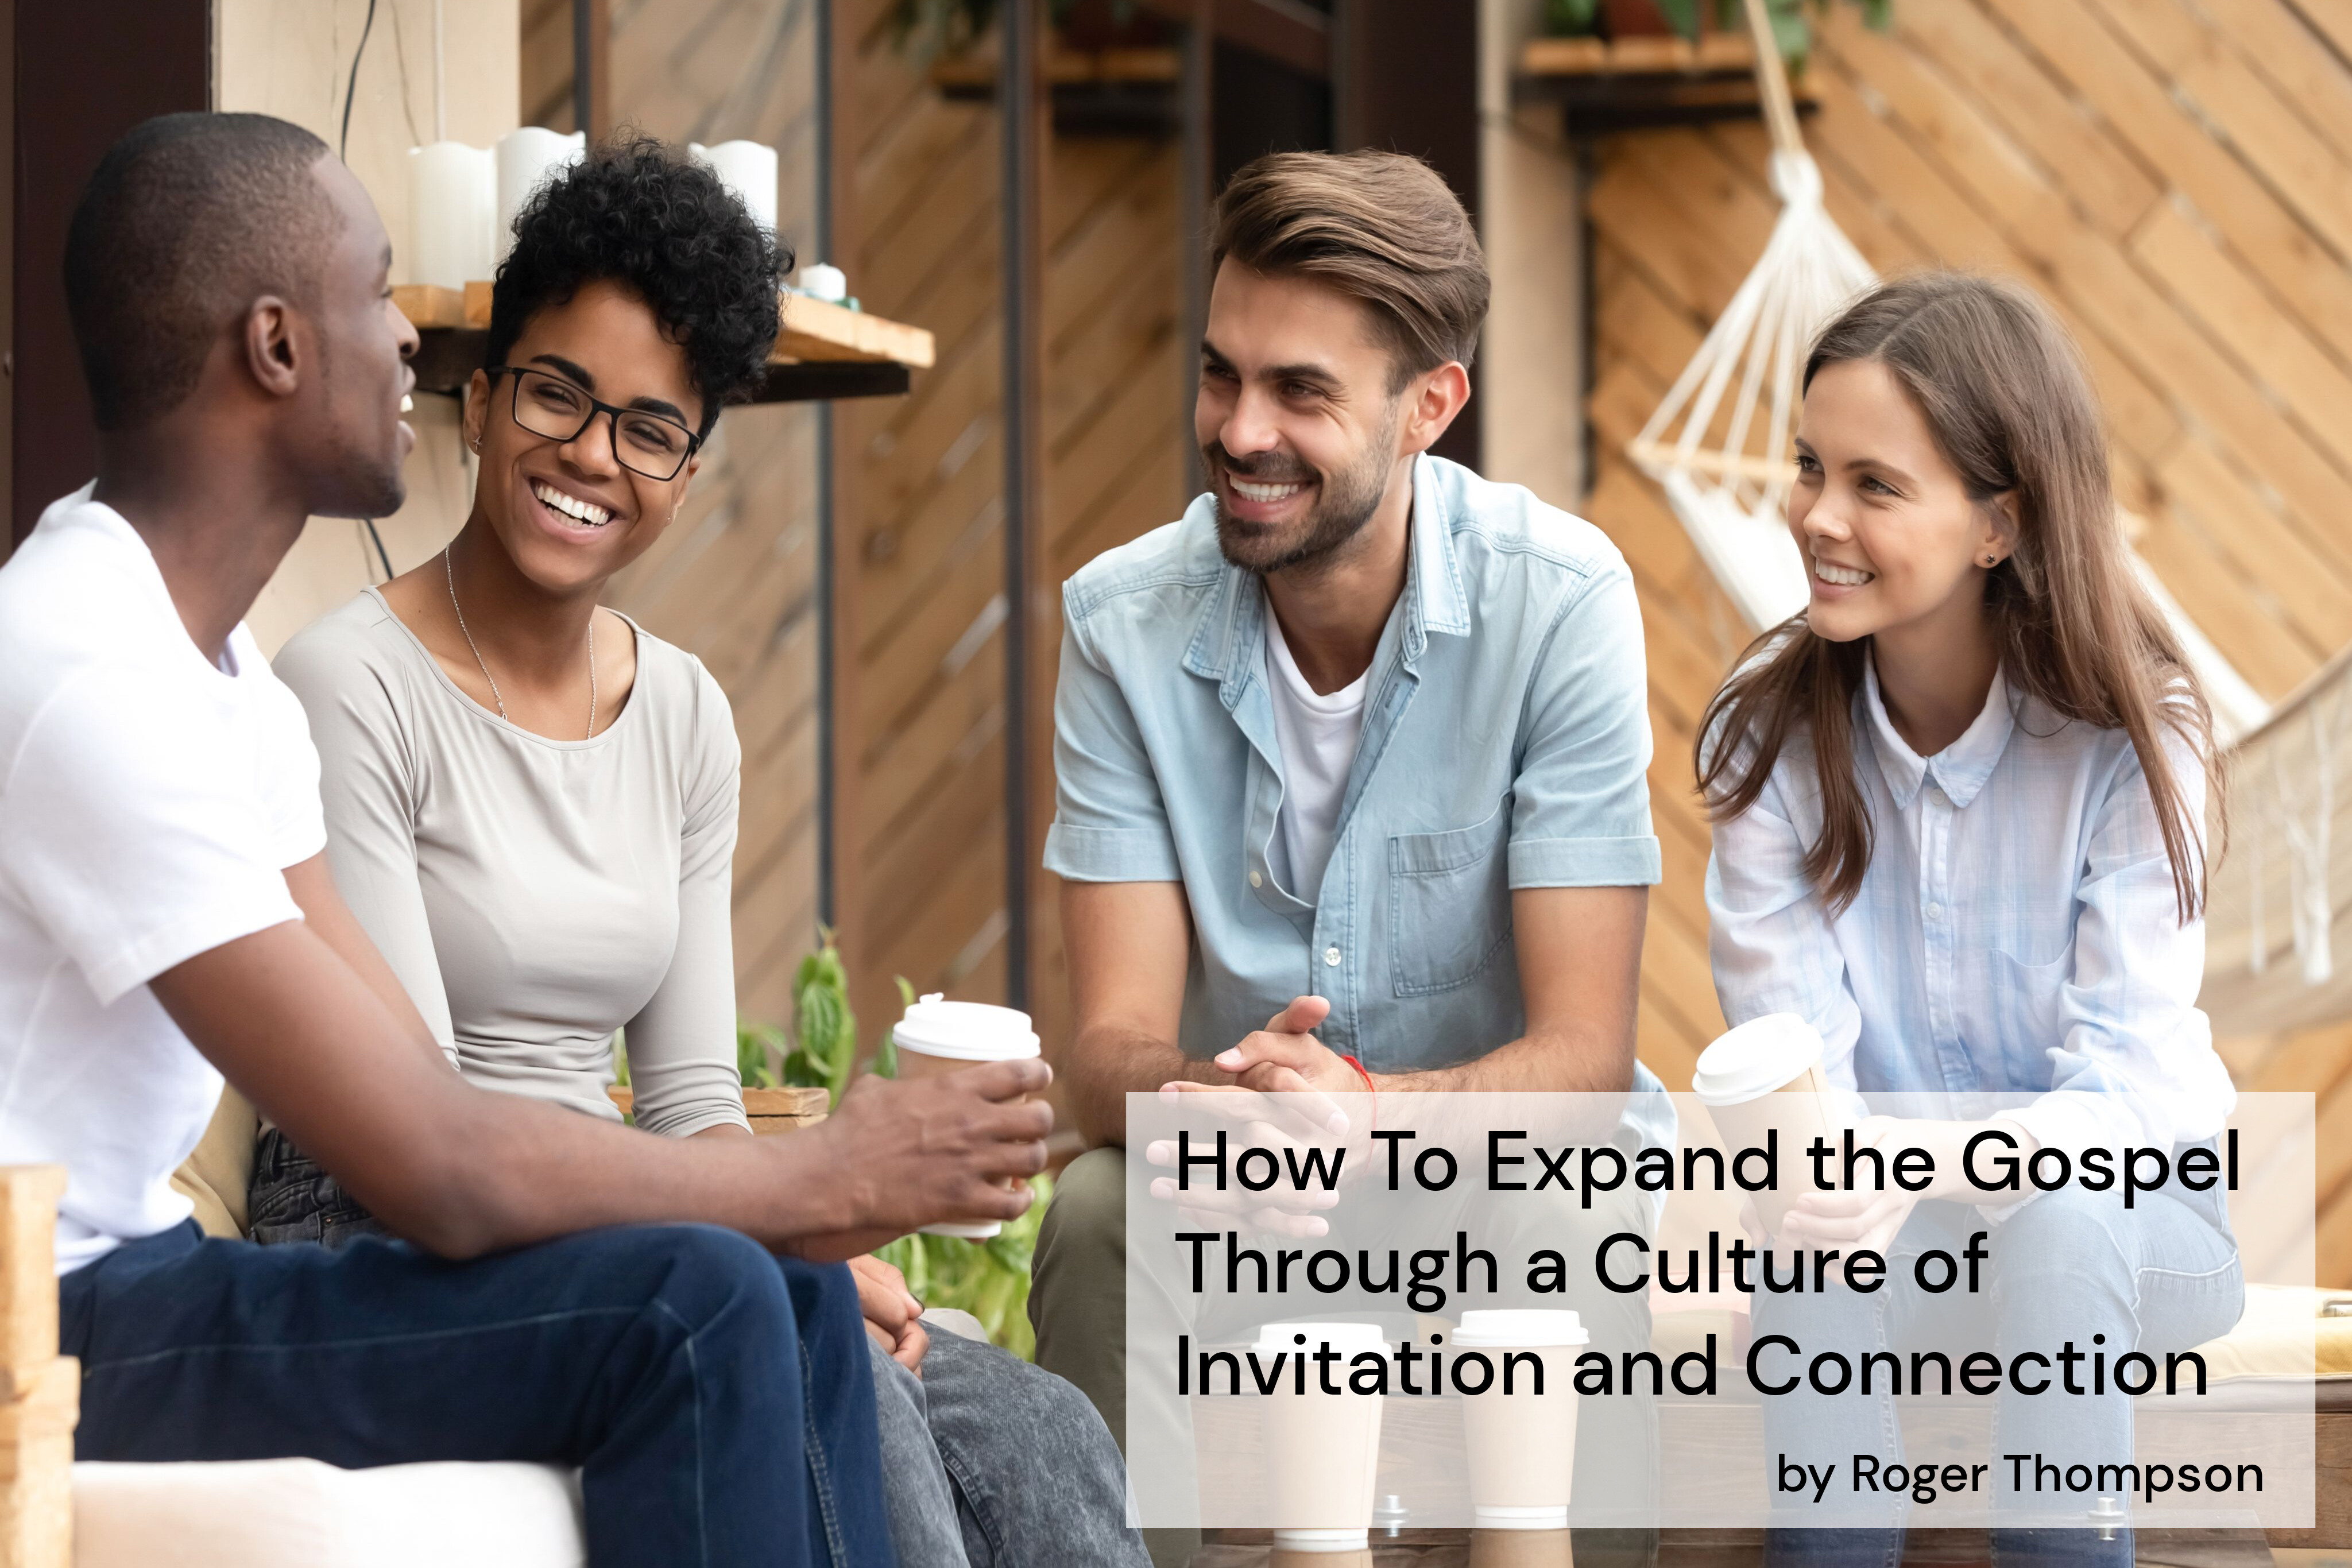 How-to-expand-the-gospel-through-a-culture-of-invitation-and-connection